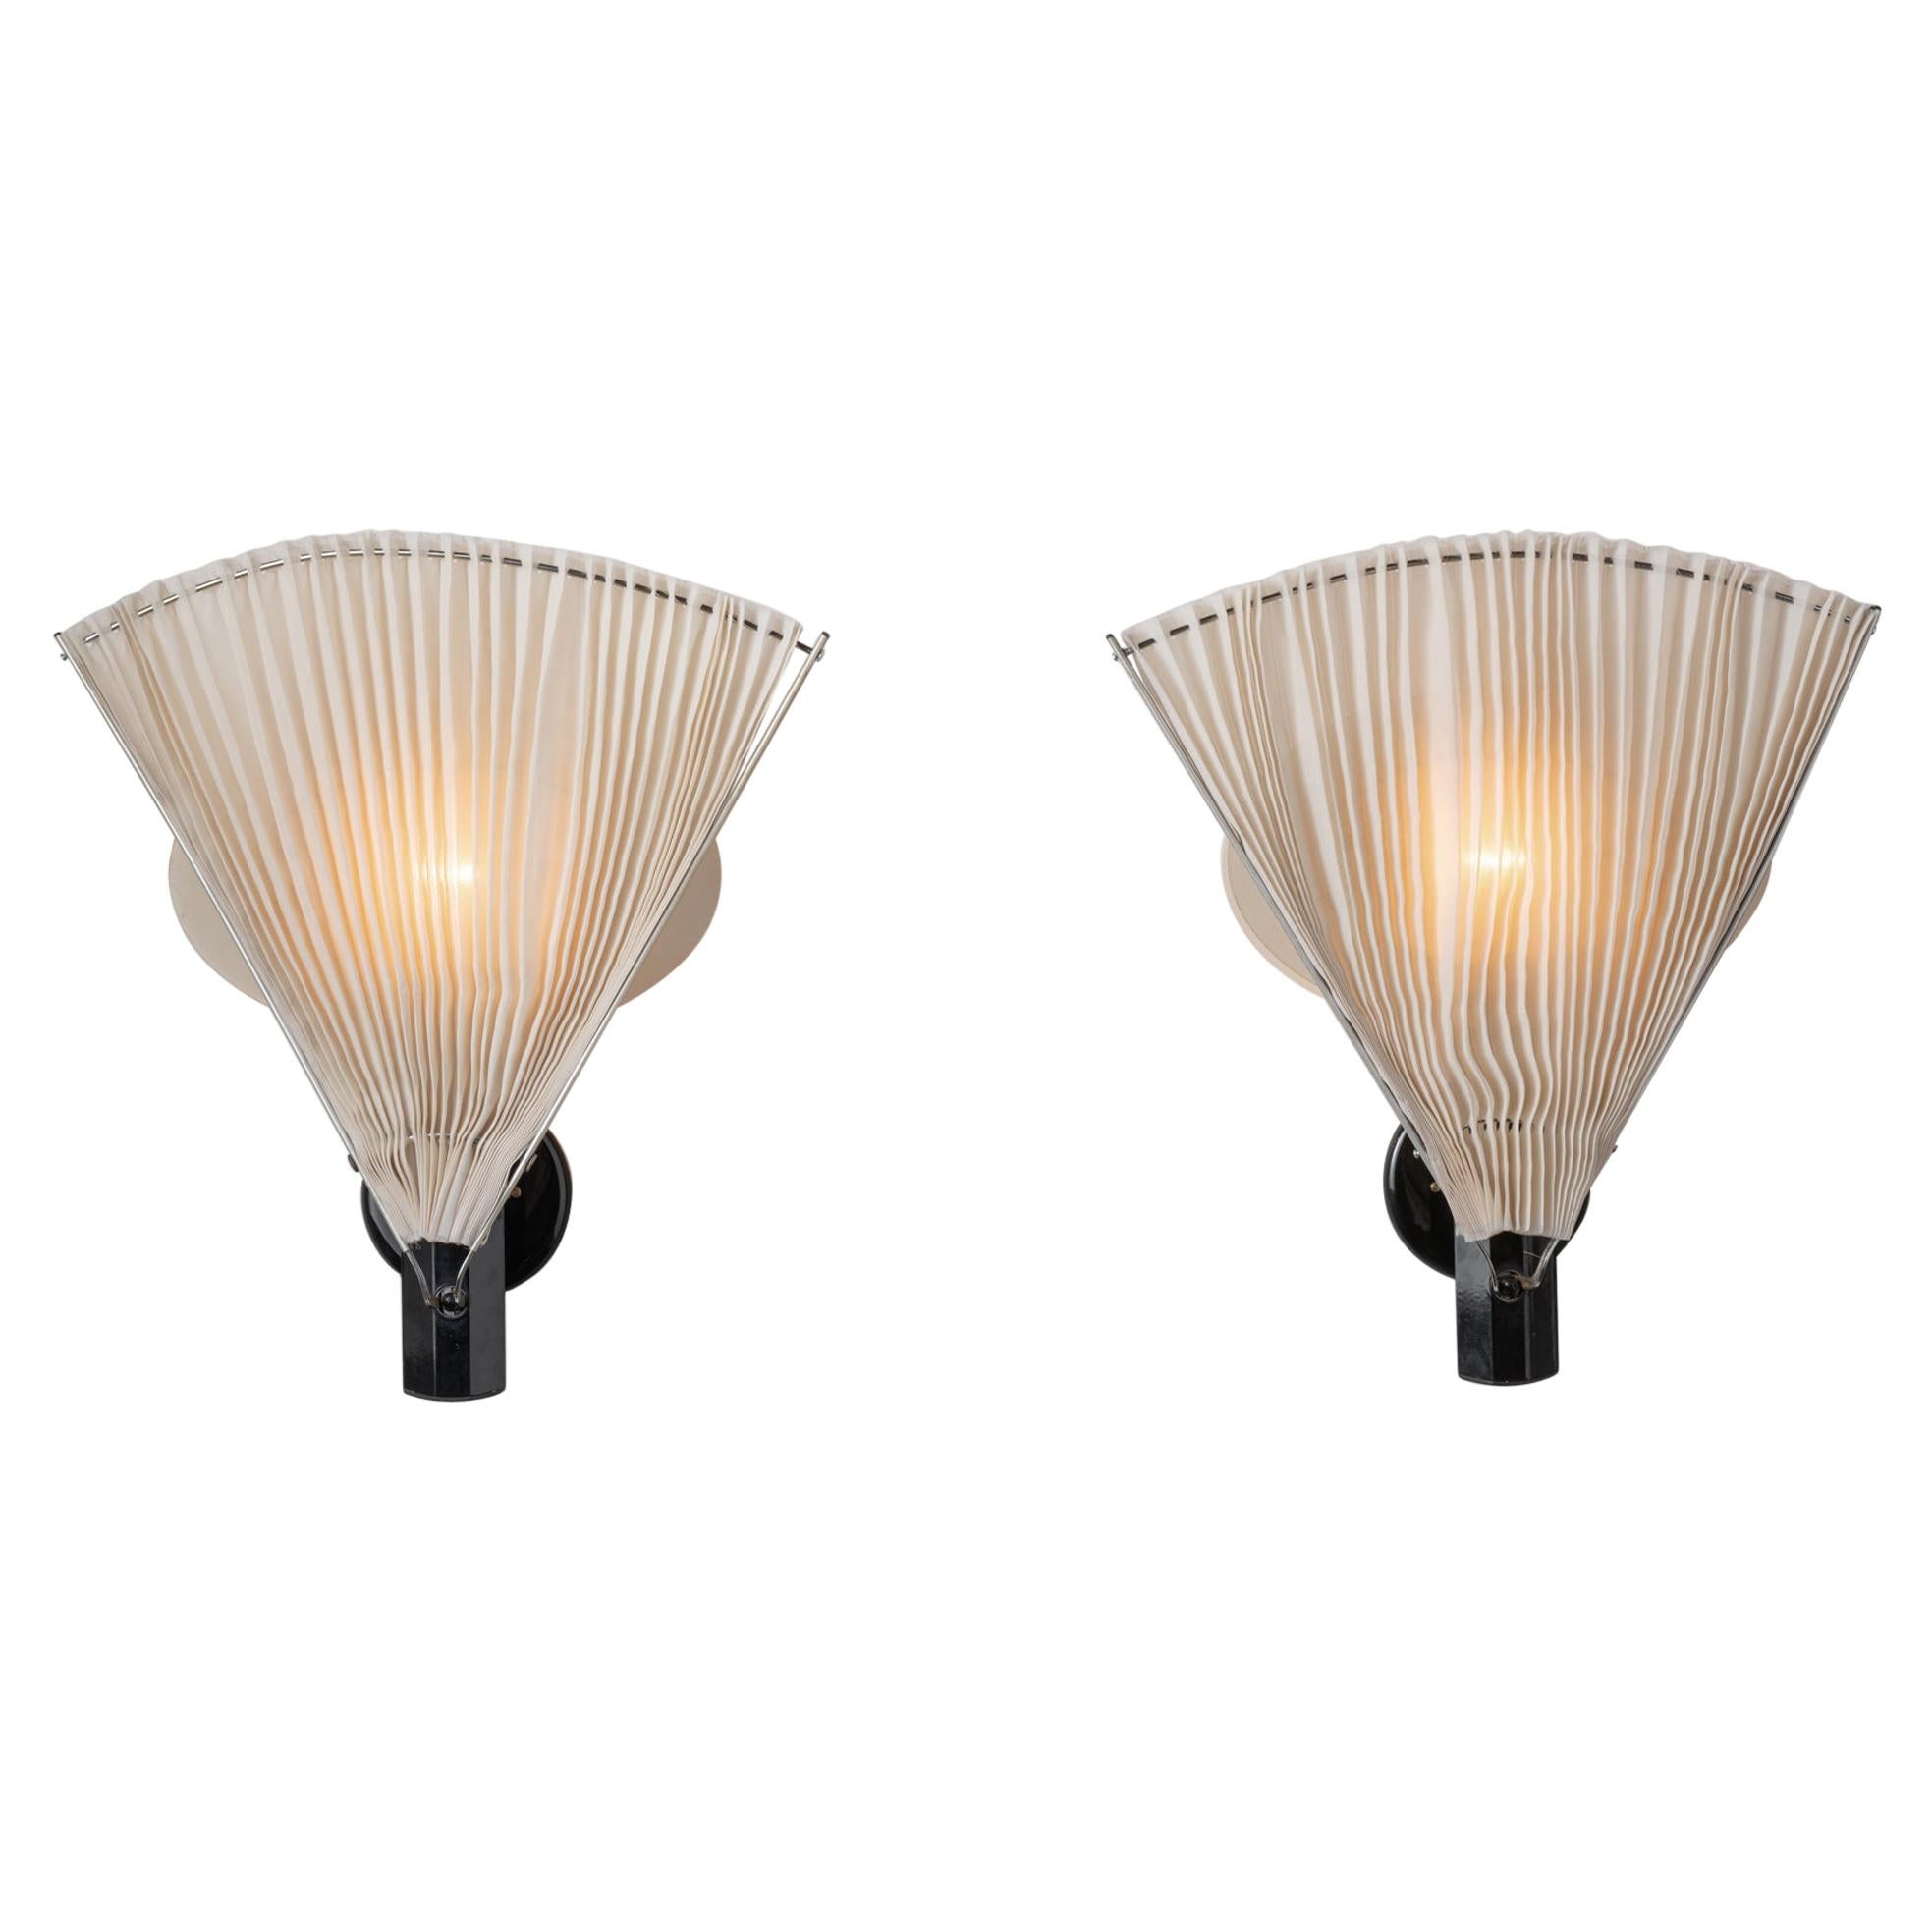 Pair of "Butterfly" Sconces by Afra and Tobia Scarpa for Flos